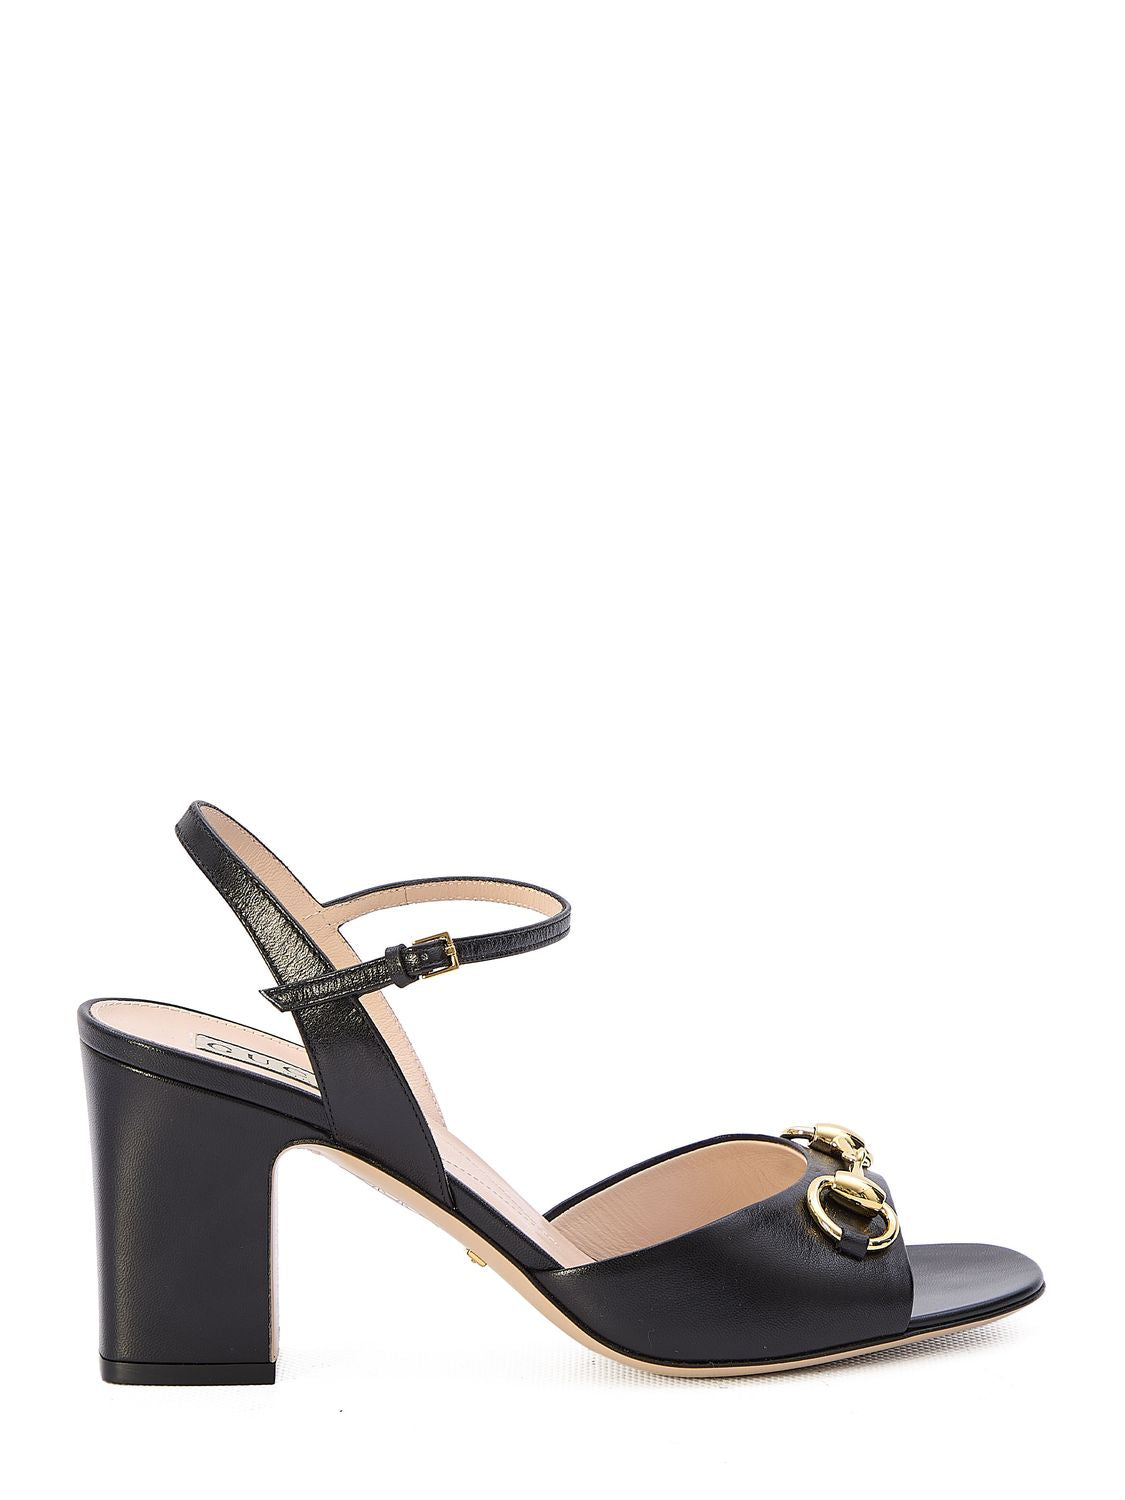 GUCCI Stylish Black Leather Sandals with Adjustable Ankle Strap and Front Horsebit for Women